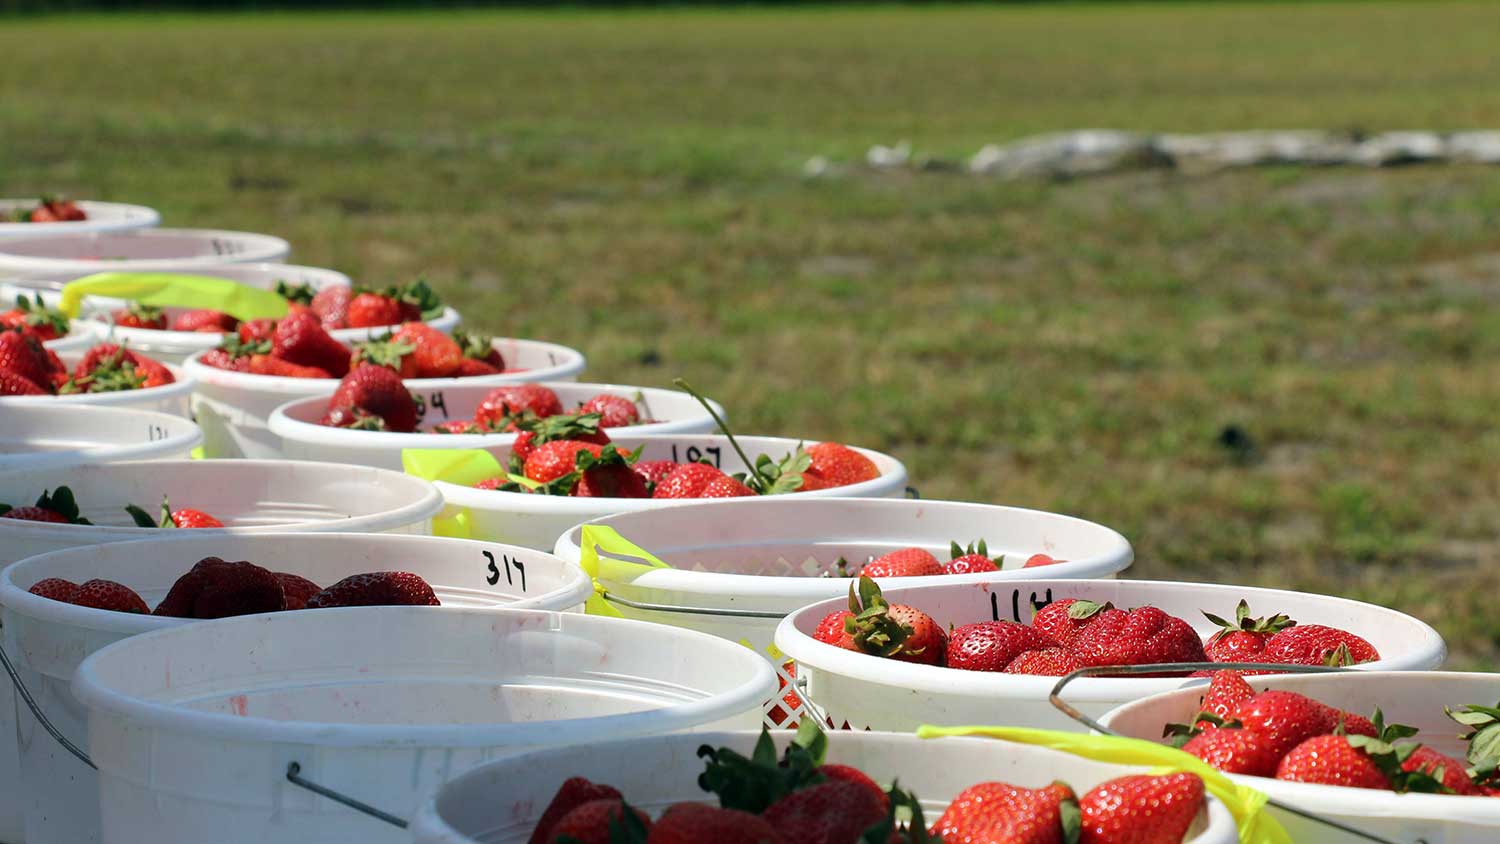 strawberry trial baskets from Castle Hayne, NC